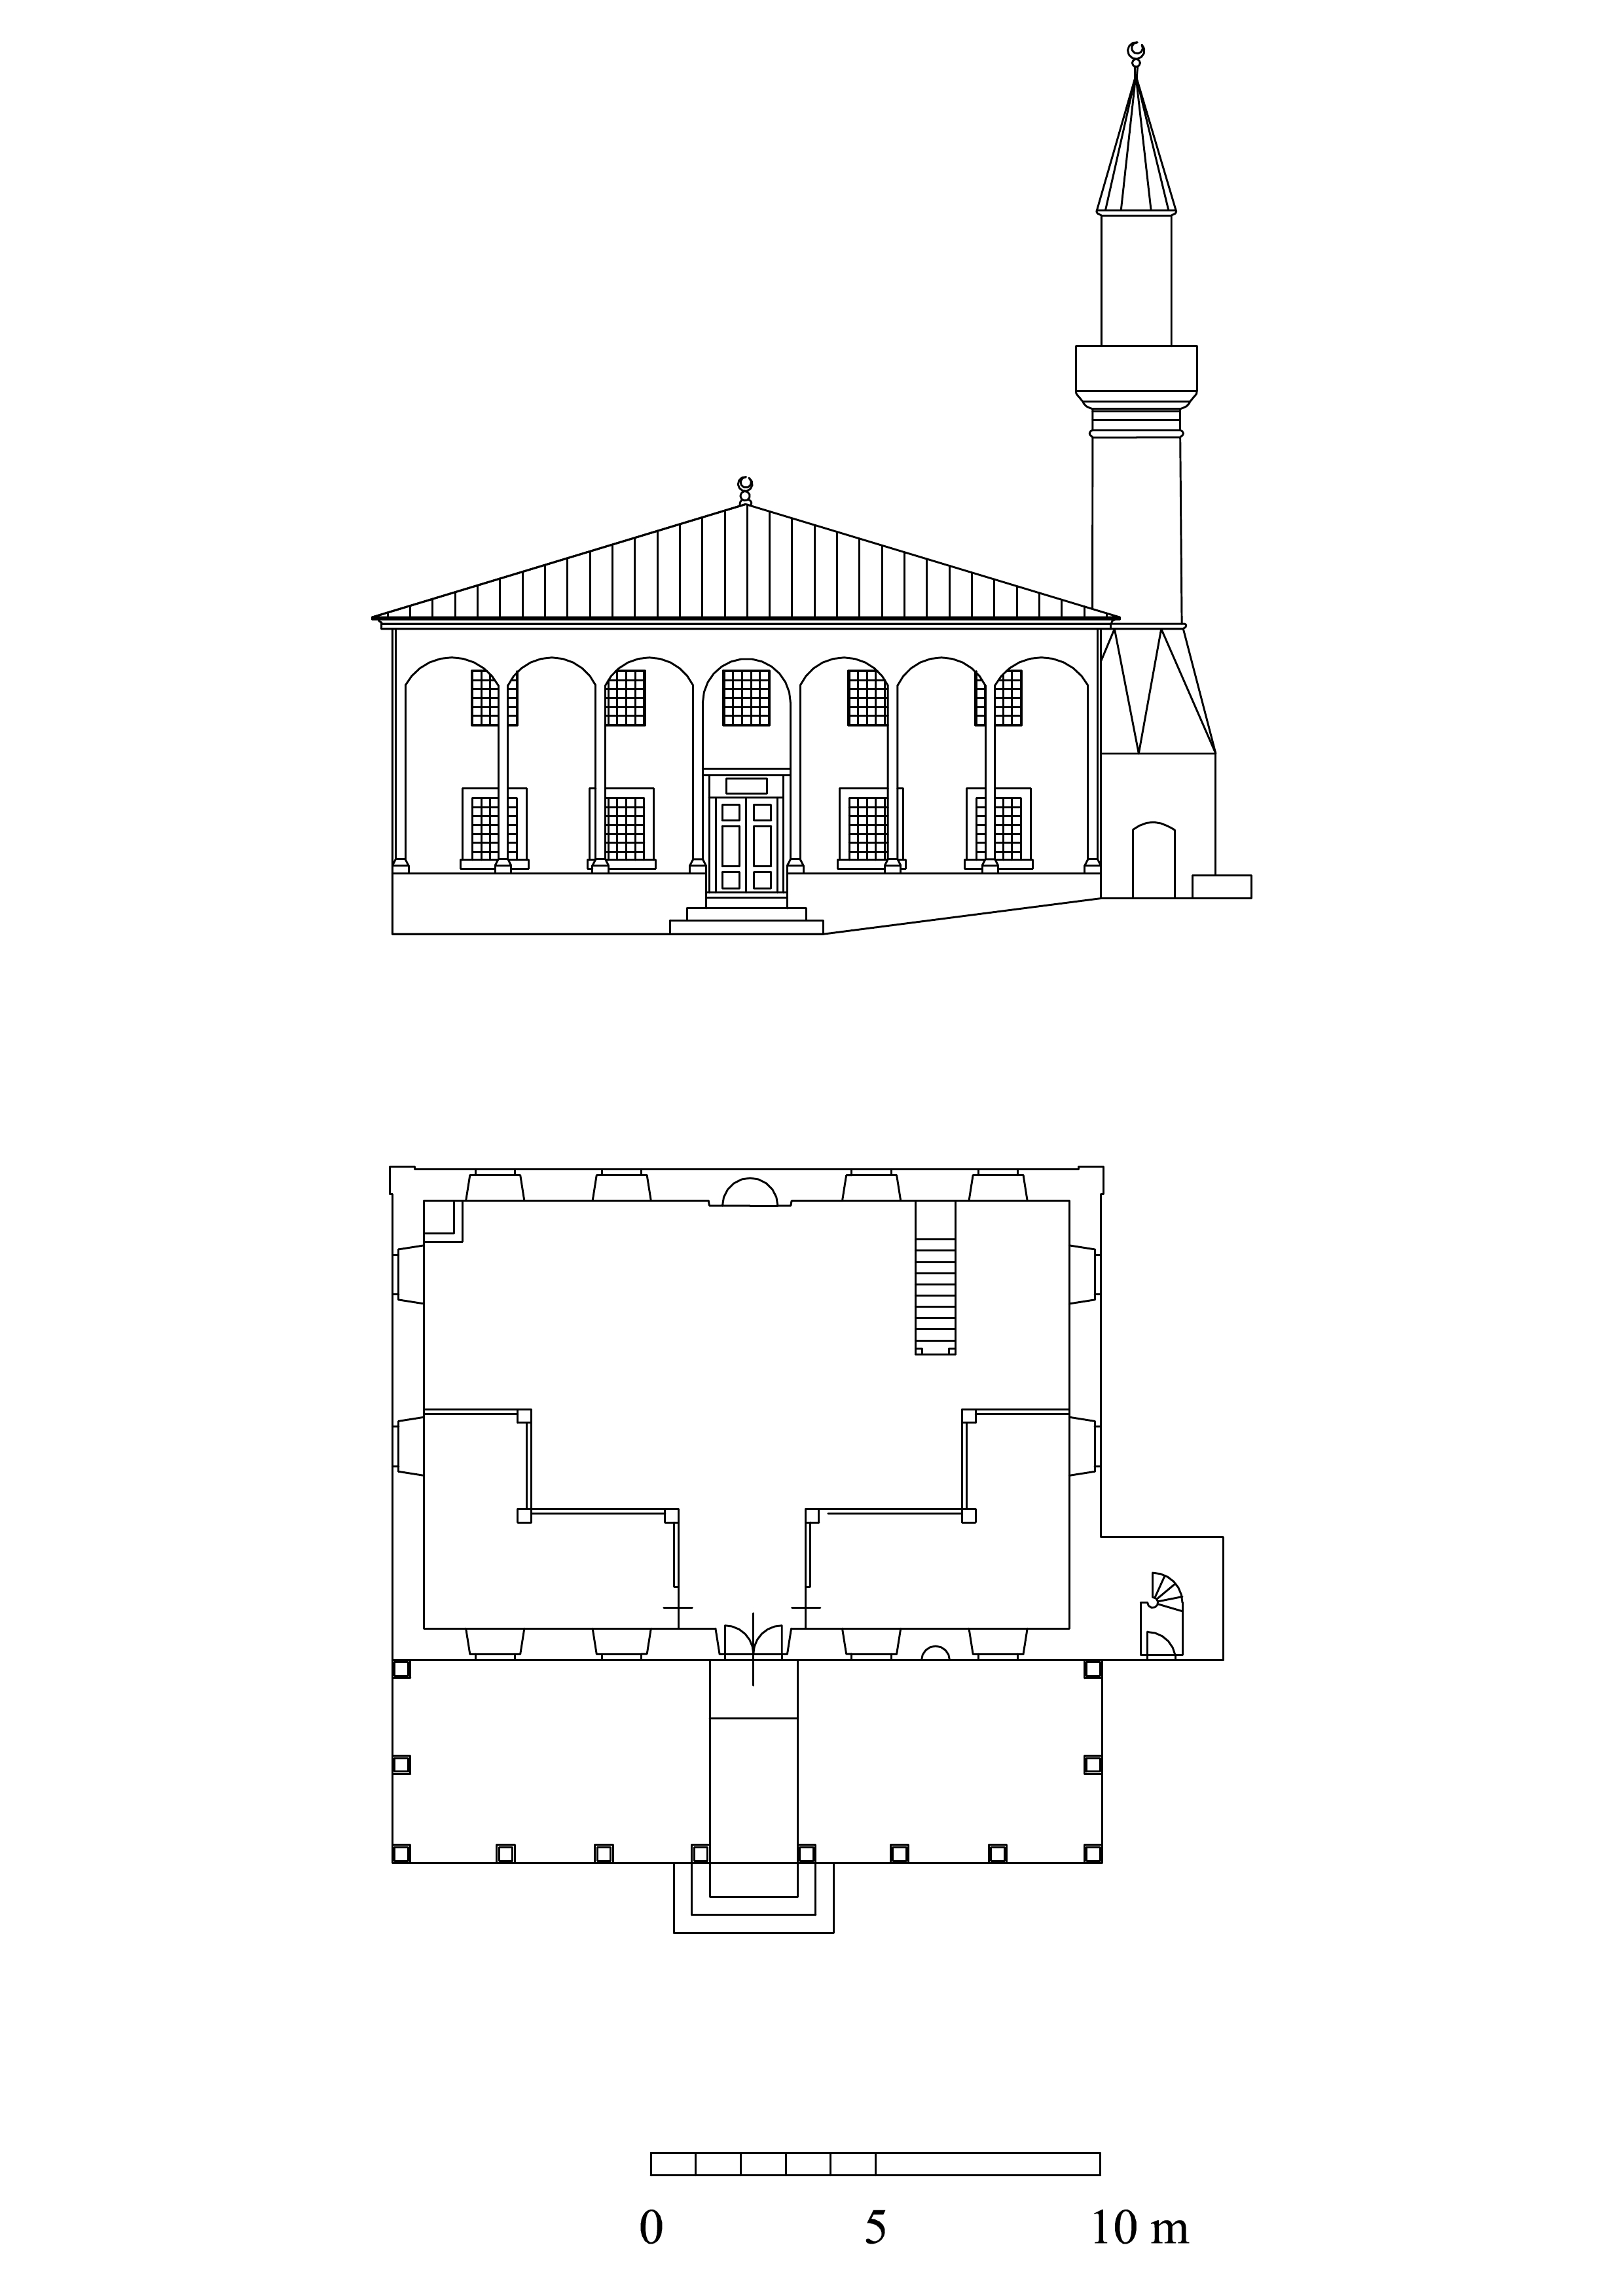 Floor plan and cross-section of mosque